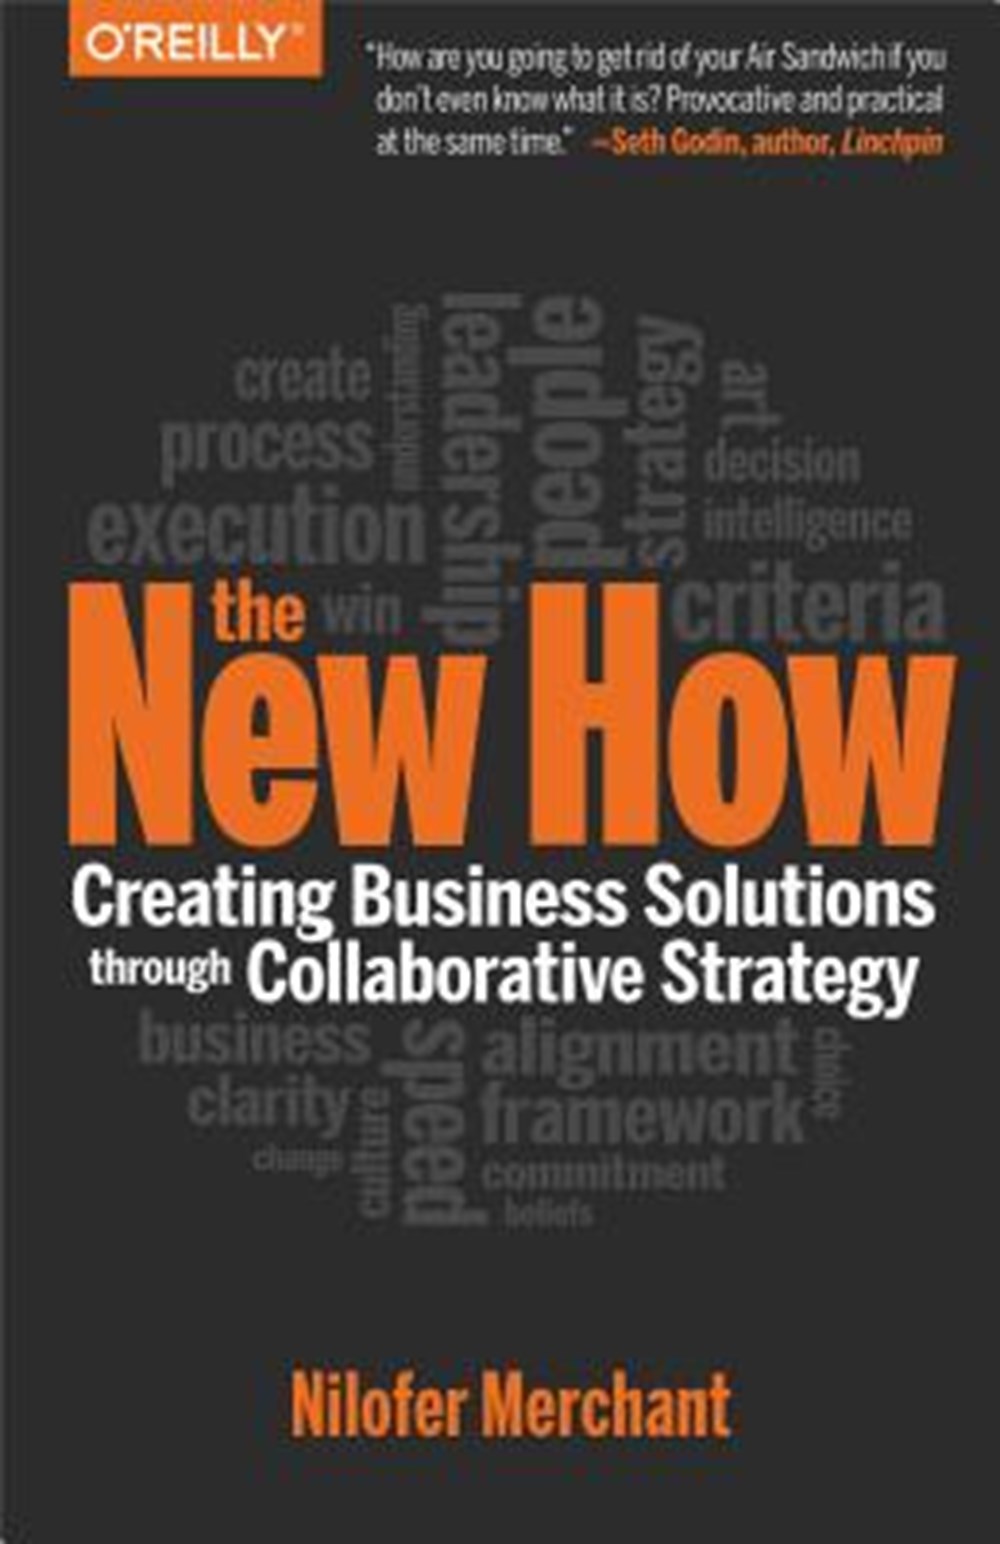 New How [paperback] Creating Business Solutions Through Collaborative Strategy